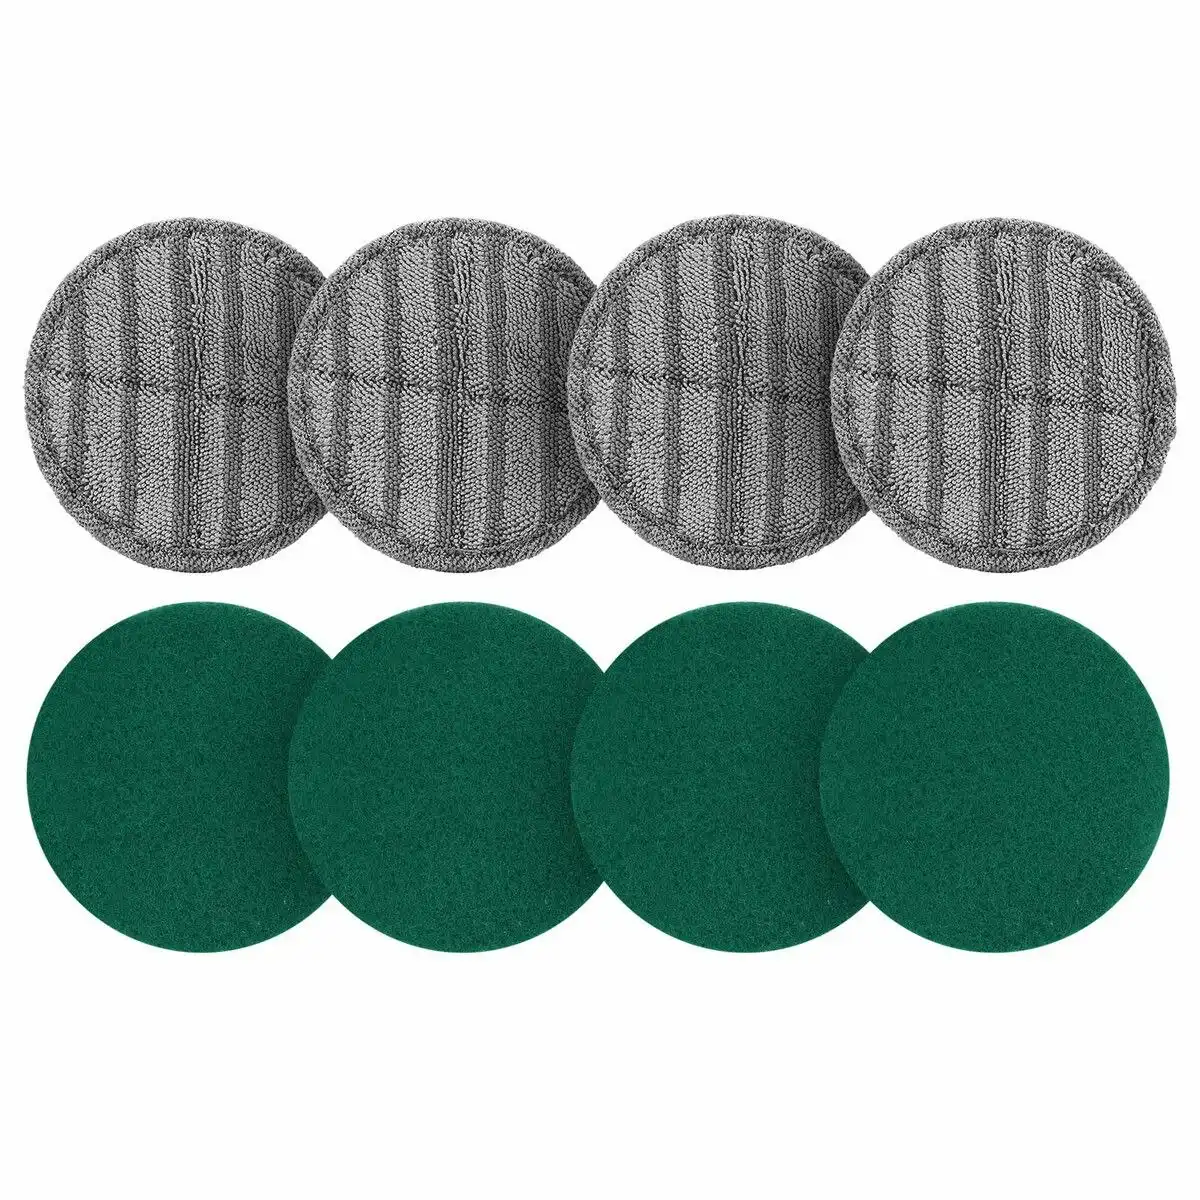 Ausway Mop Replacement Pads Scouring Green Scourer Microfiber Replaceable for Cordless Electric Spin Floor Cleaner Polisher Washer Sweeper